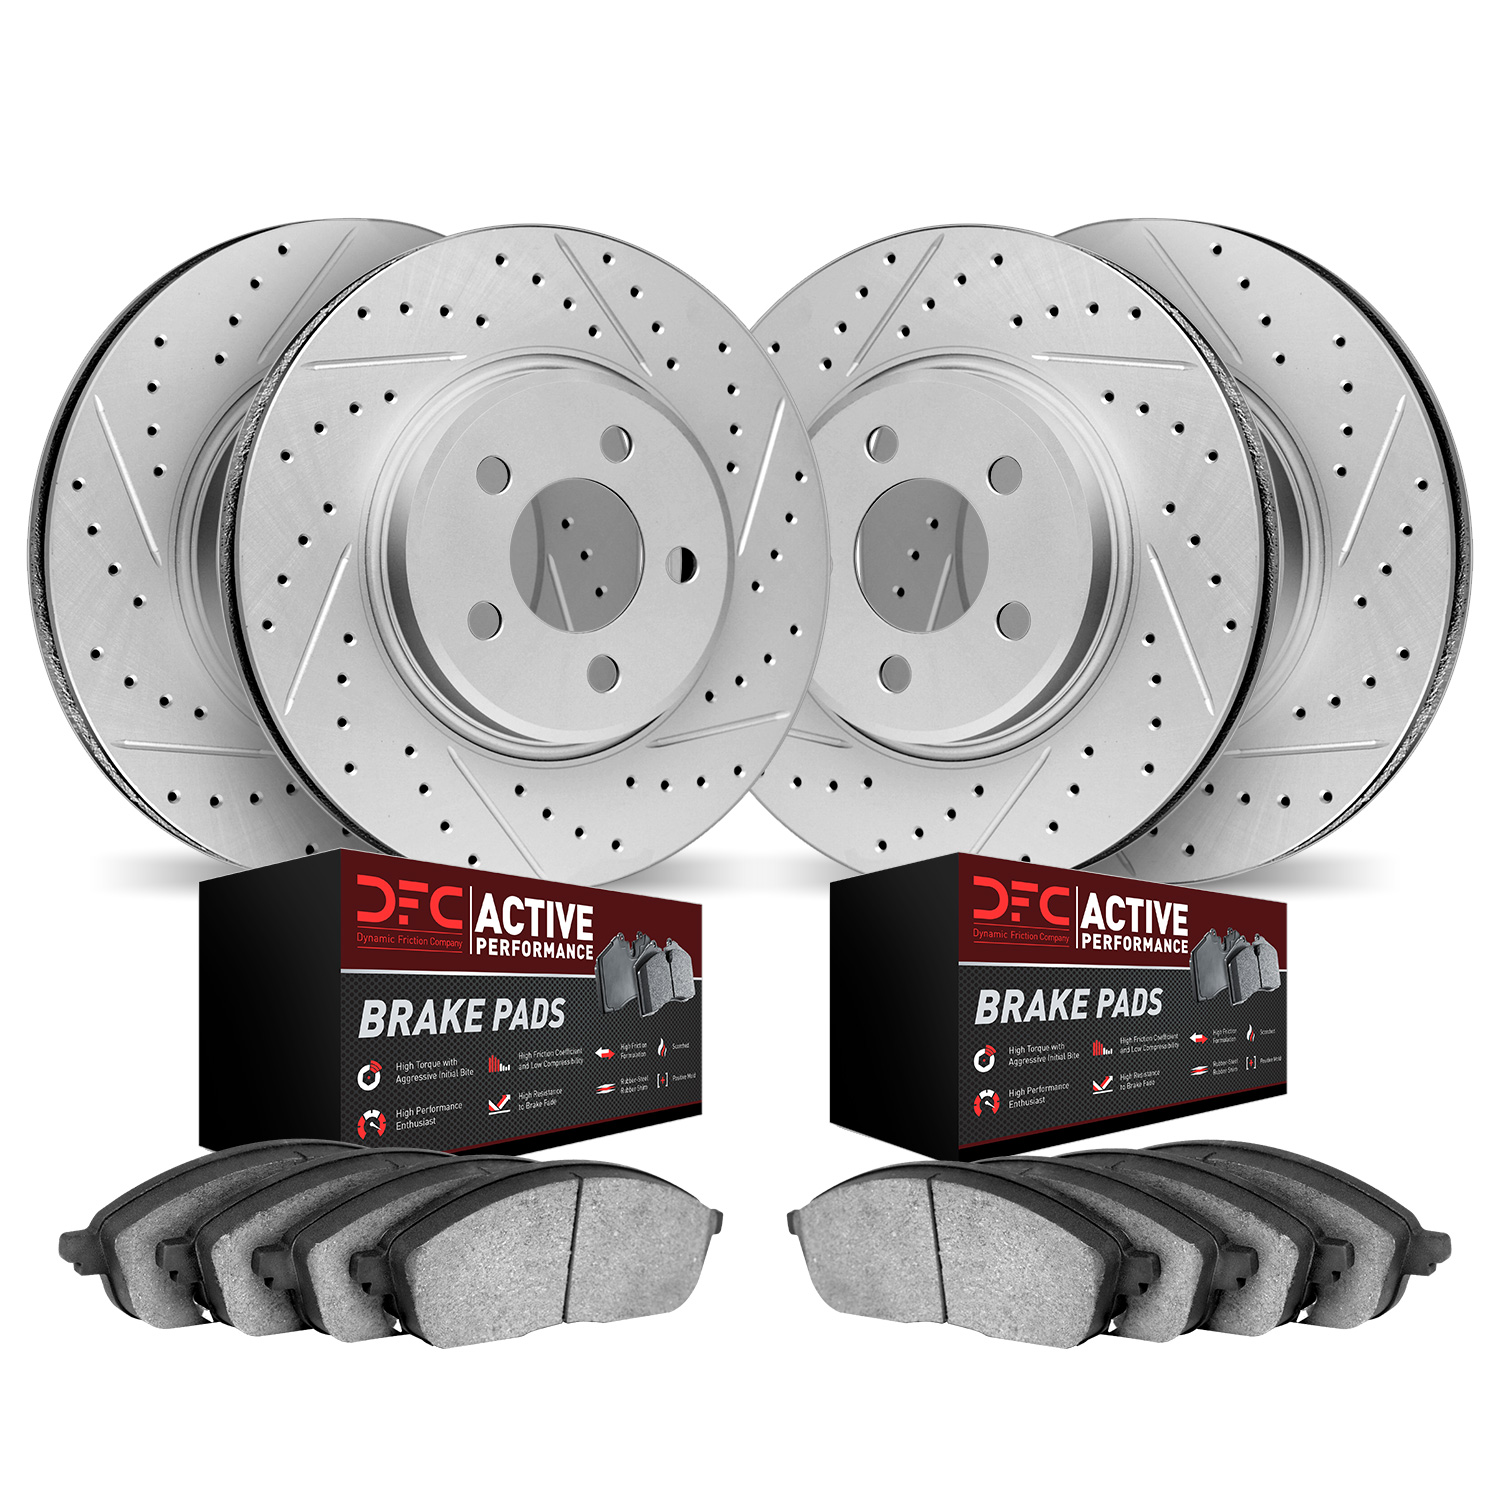 2704-42000 Geoperformance Drilled/Slotted Brake Rotors with Active Performance Pads Kit, Fits Select Mopar, Position: Front and